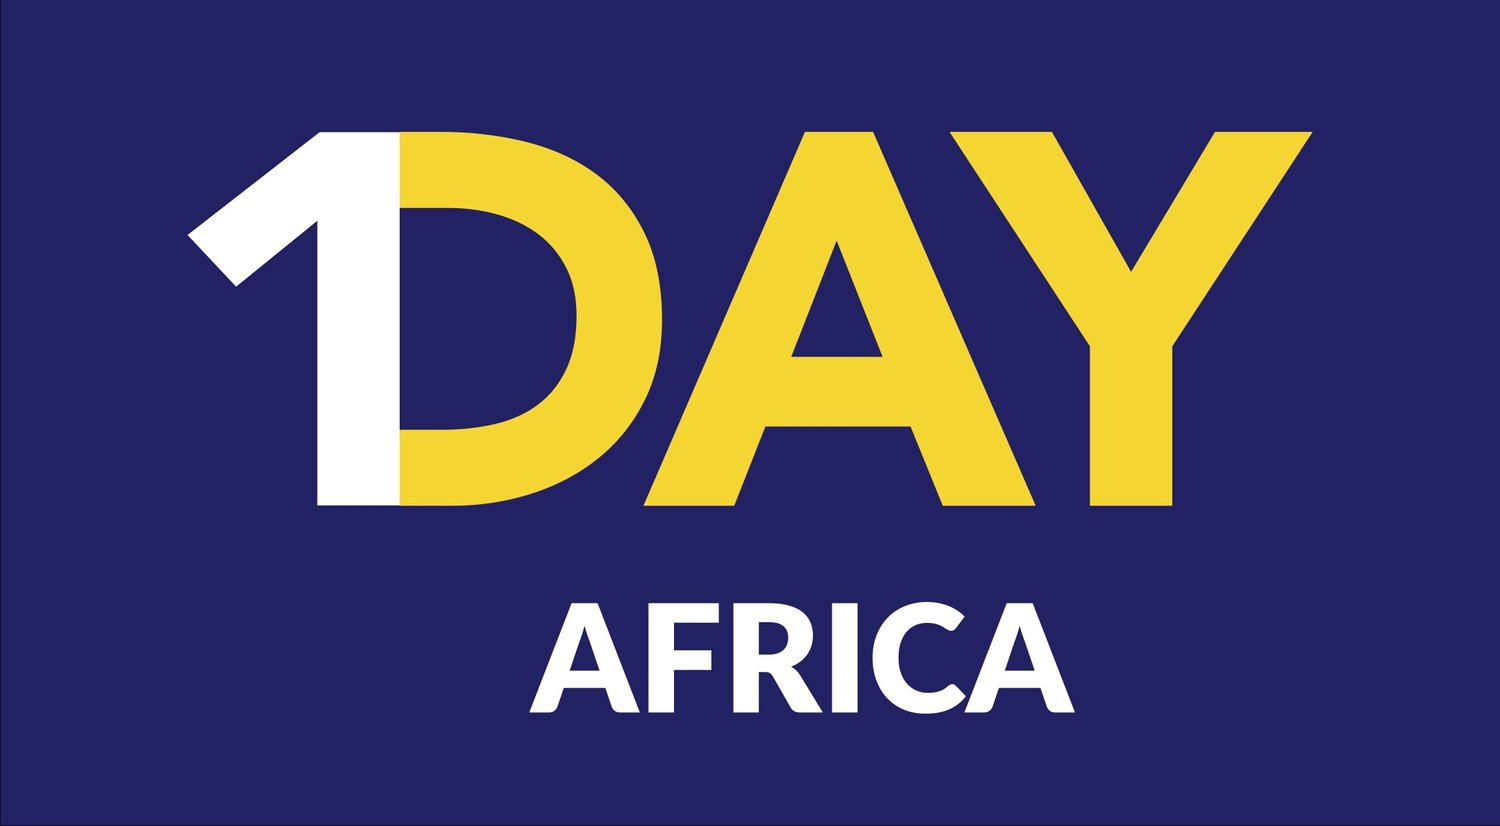 1Day Africa 